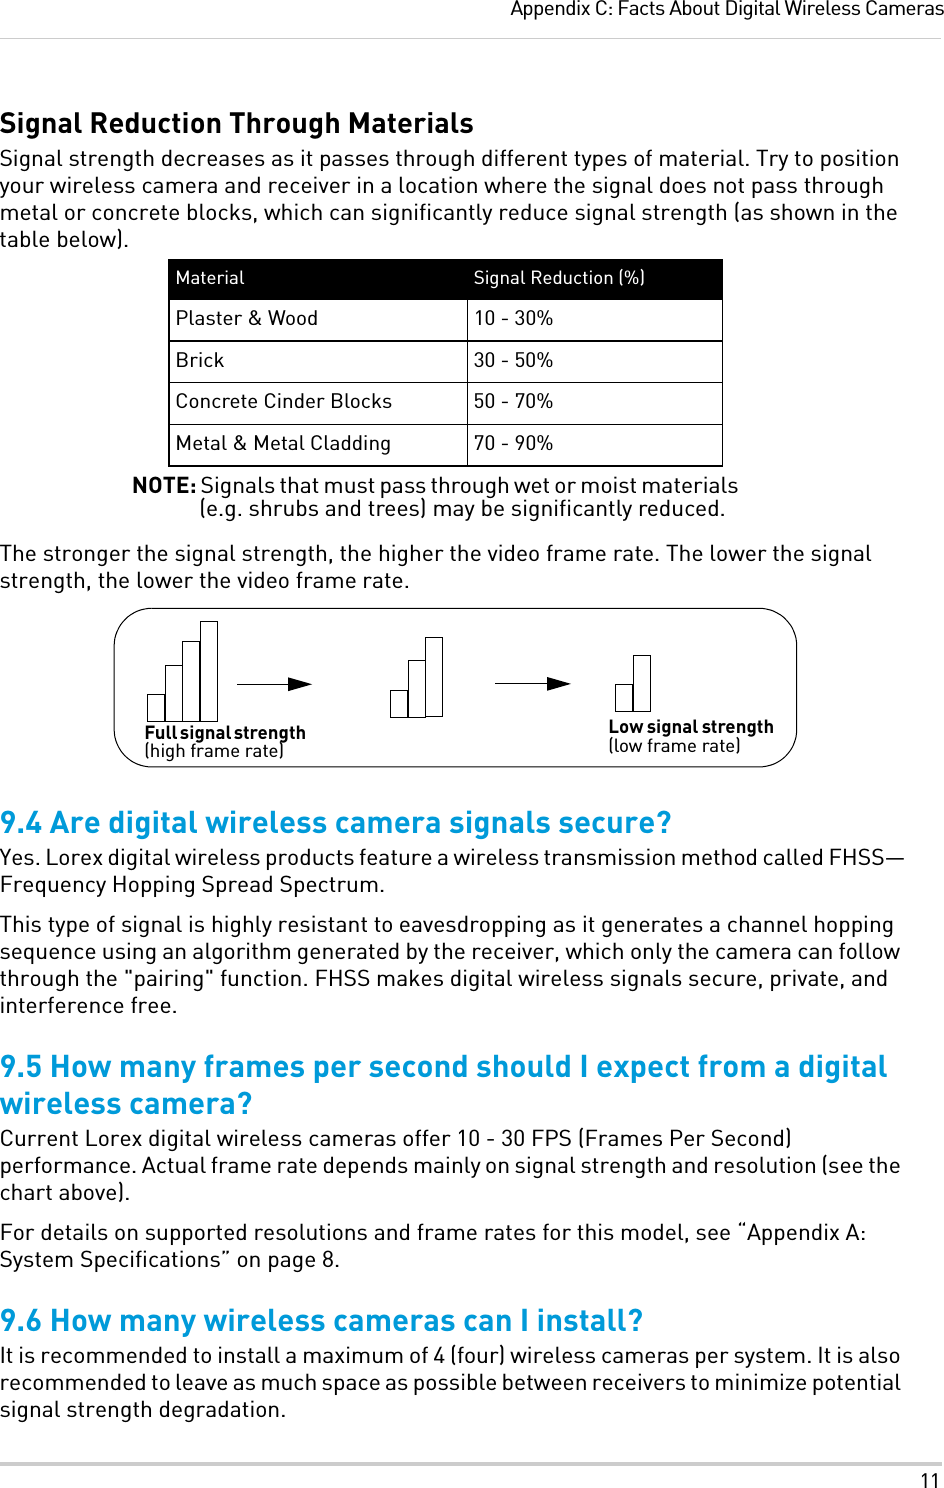 11Appendix C: Facts About Digital Wireless CamerasSignal Reduction Through MaterialsSignal strength decreases as it passes through different types of material. Try to position your wireless camera and receiver in a location where the signal does not pass through metal or concrete blocks, which can significantly reduce signal strength (as shown in the table below).Material Signal Reduction (%)Plaster &amp; Wood 10 - 30%Brick 30 - 50%Concrete Cinder Blocks 50 - 70%Metal &amp; Metal Cladding 70 - 90%NOTE: Signals that must pass through wet or moist materials (e.g. shrubs and trees) may be significantly reduced.The stronger the signal strength, the higher the video frame rate. The lower the signal strength, the lower the video frame rate.Full signal strength (high frame rate)Low signal strength (low frame rate)9.4 Are digital wireless camera signals secure?Yes. Lorex digital wireless products feature a wireless transmission method called FHSS—Frequency Hopping Spread Spectrum. This type of signal is highly resistant to eavesdropping as it generates a channel hopping sequence using an algorithm generated by the receiver, which only the camera can follow through the &quot;pairing&quot; function. FHSS makes digital wireless signals secure, private, and interference free.9.5 How many frames per second should I expect from a digital wireless camera?Current Lorex digital wireless cameras offer 10 - 30 FPS (Frames Per Second) performance. Actual frame rate depends mainly on signal strength and resolution (see the chart above).For details on supported resolutions and frame rates for this model, see “Appendix A: System Specifications” on page 8.9.6 How many wireless cameras can I install?It is recommended to install a maximum of 4 (four) wireless cameras per system. It is also recommended to leave as much space as possible between receivers to minimize potential signal strength degradation.